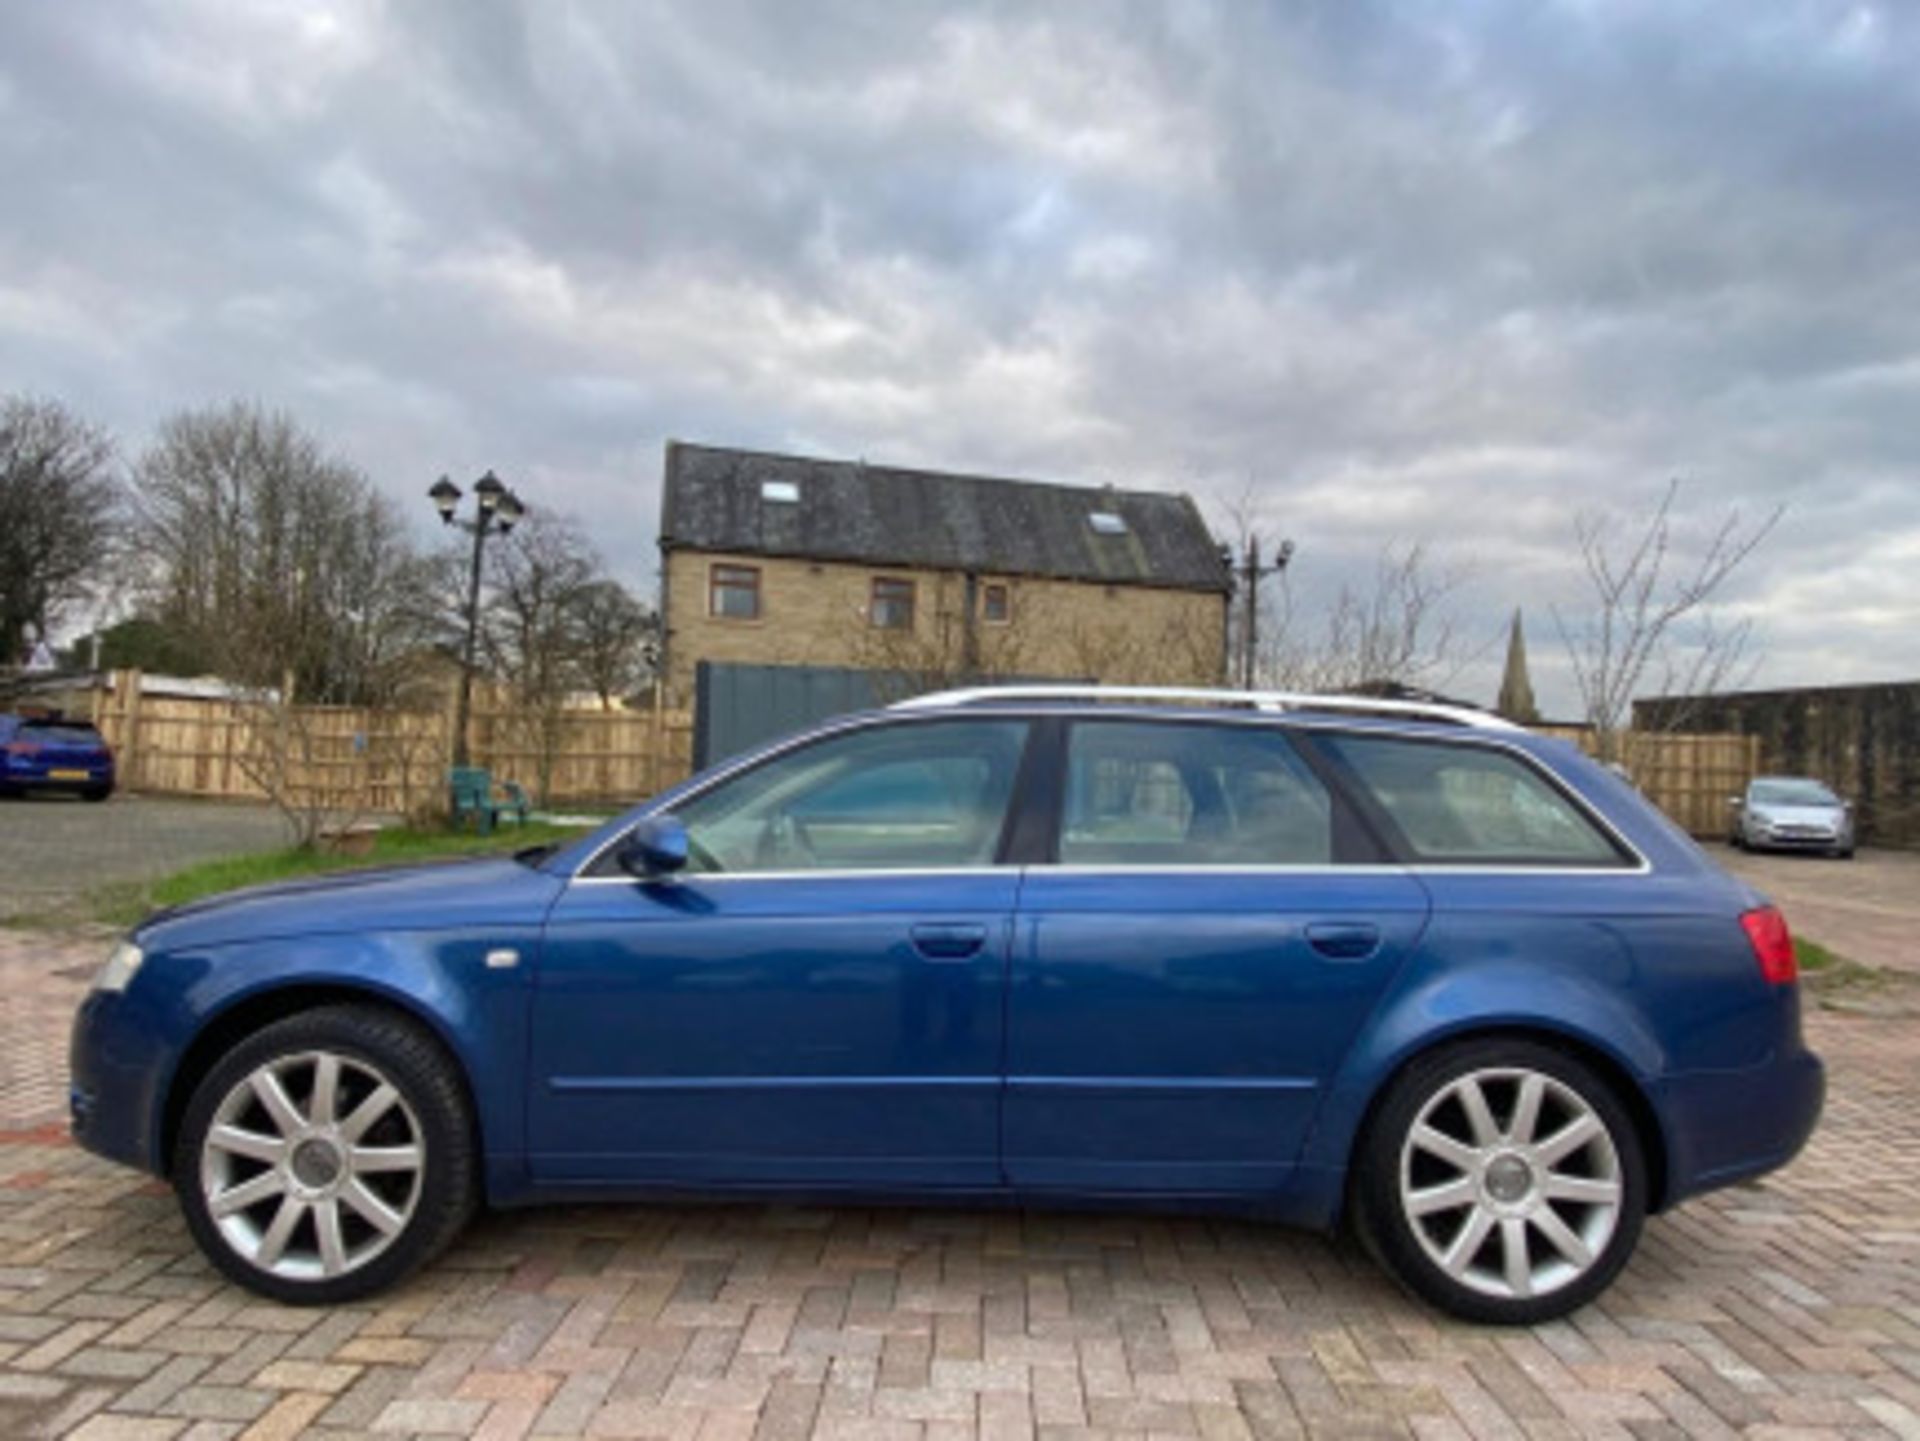 AUDI A4 AVANT 1.9 TDI SE 5DR ESTATE - RARE AND RELIABLE LUXURY WAGON >>--NO VAT ON HAMMER--<< - Image 32 of 97